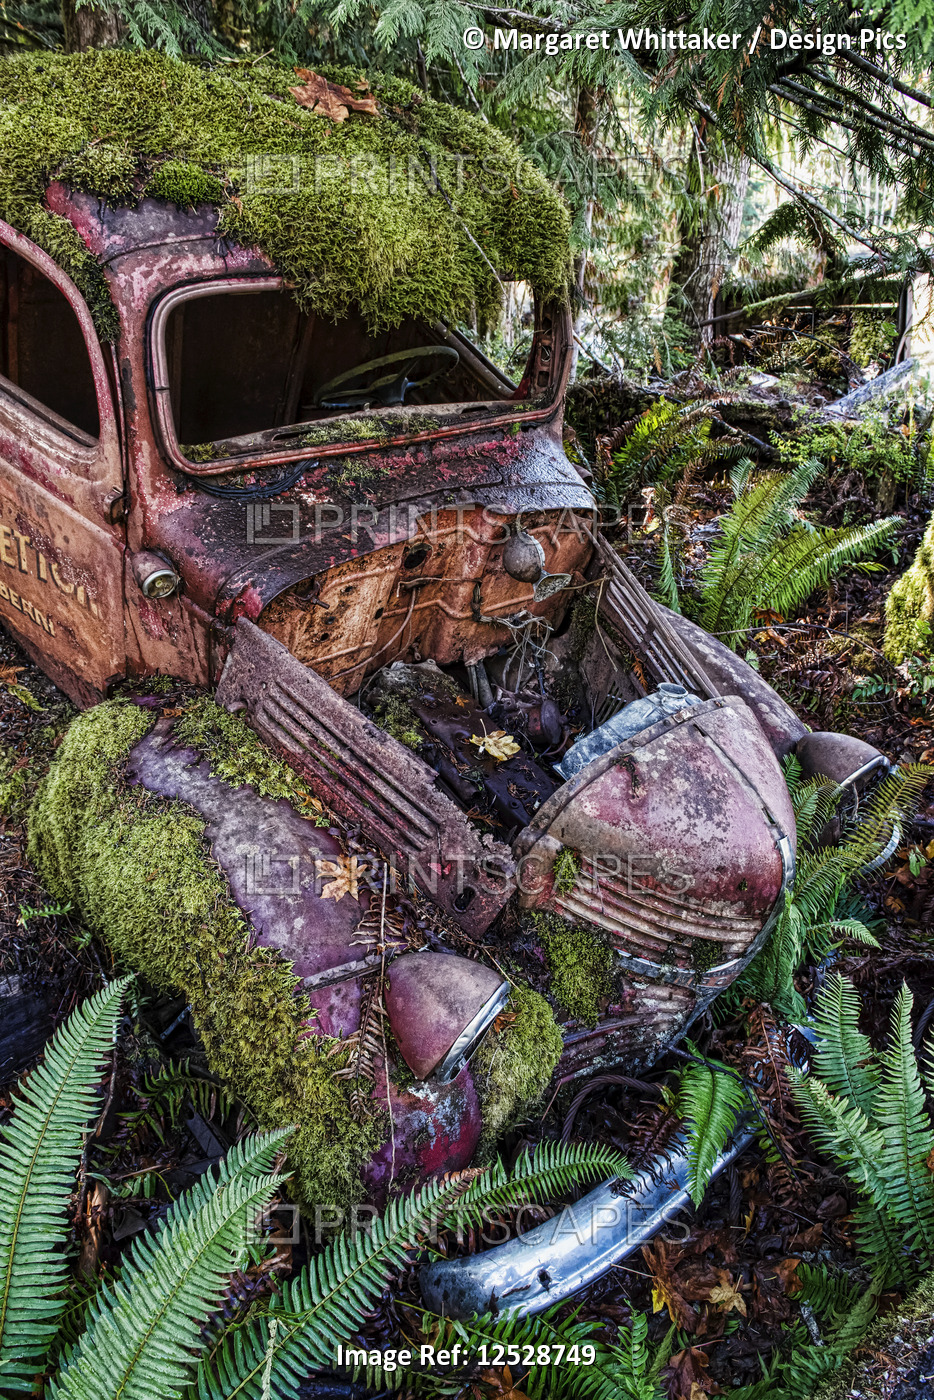 Arty image of derelict motor car in a ditch overgrown with moss and ferns, ...